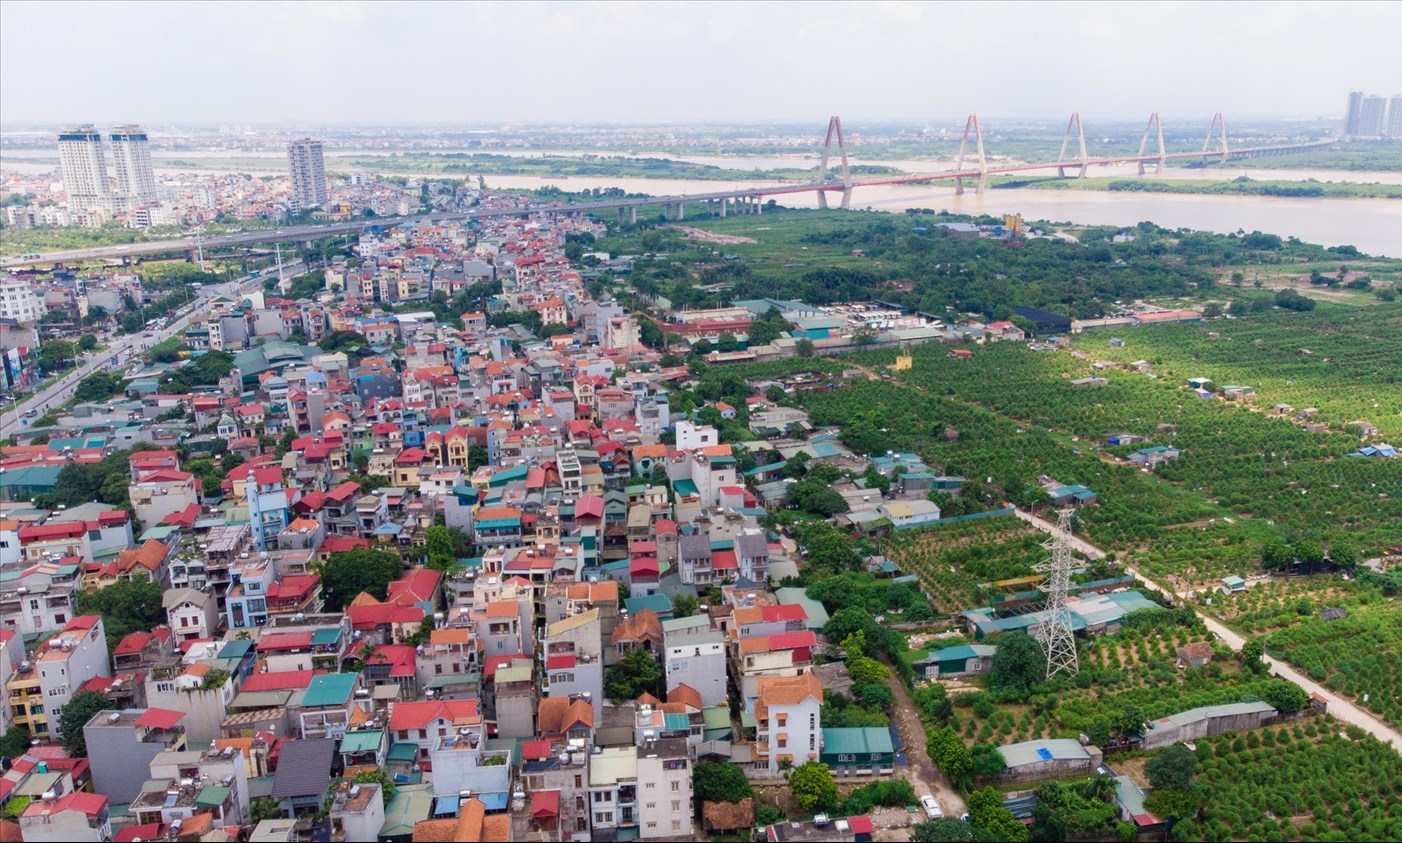 To speed up the progress and quality of planning for the 2021–2030 period in Vietnam